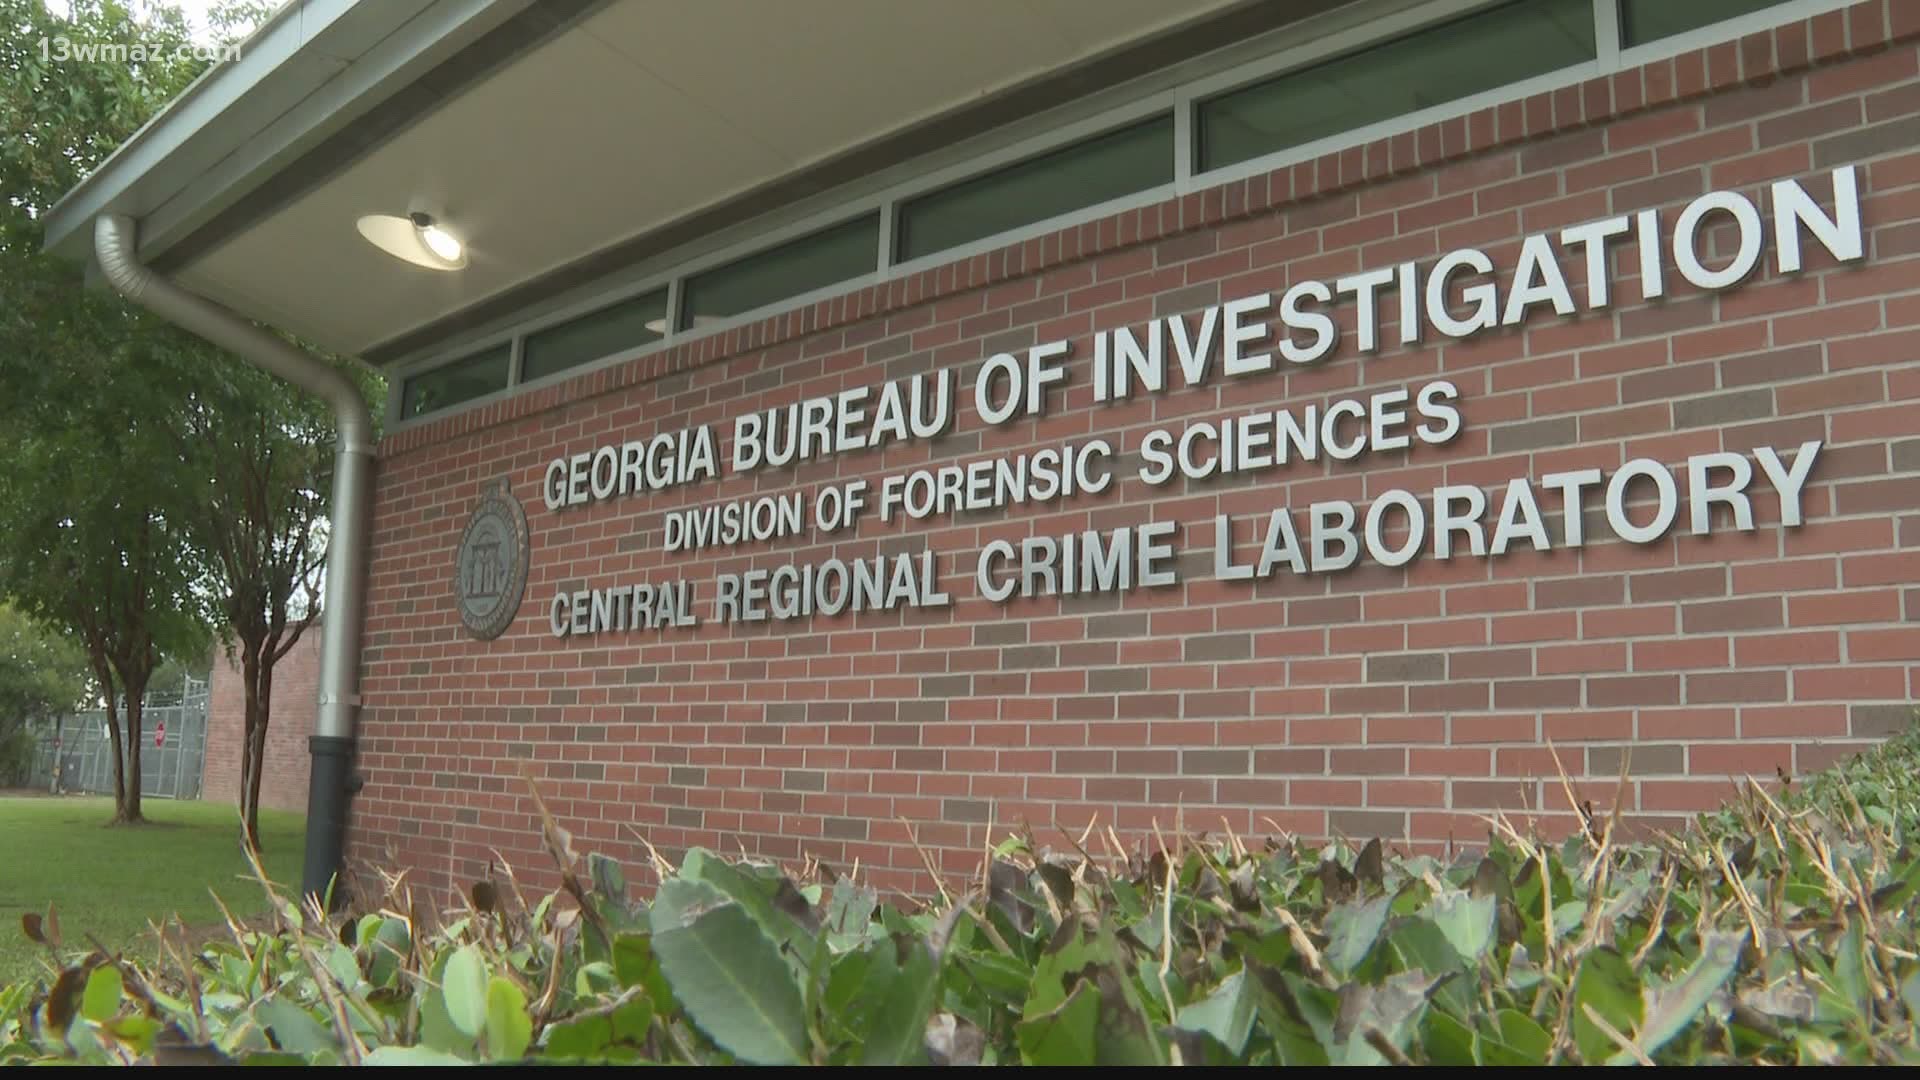 It's set to close in three weeks. However, the Central Regional Crime Lab will stay open, according to the GBI.